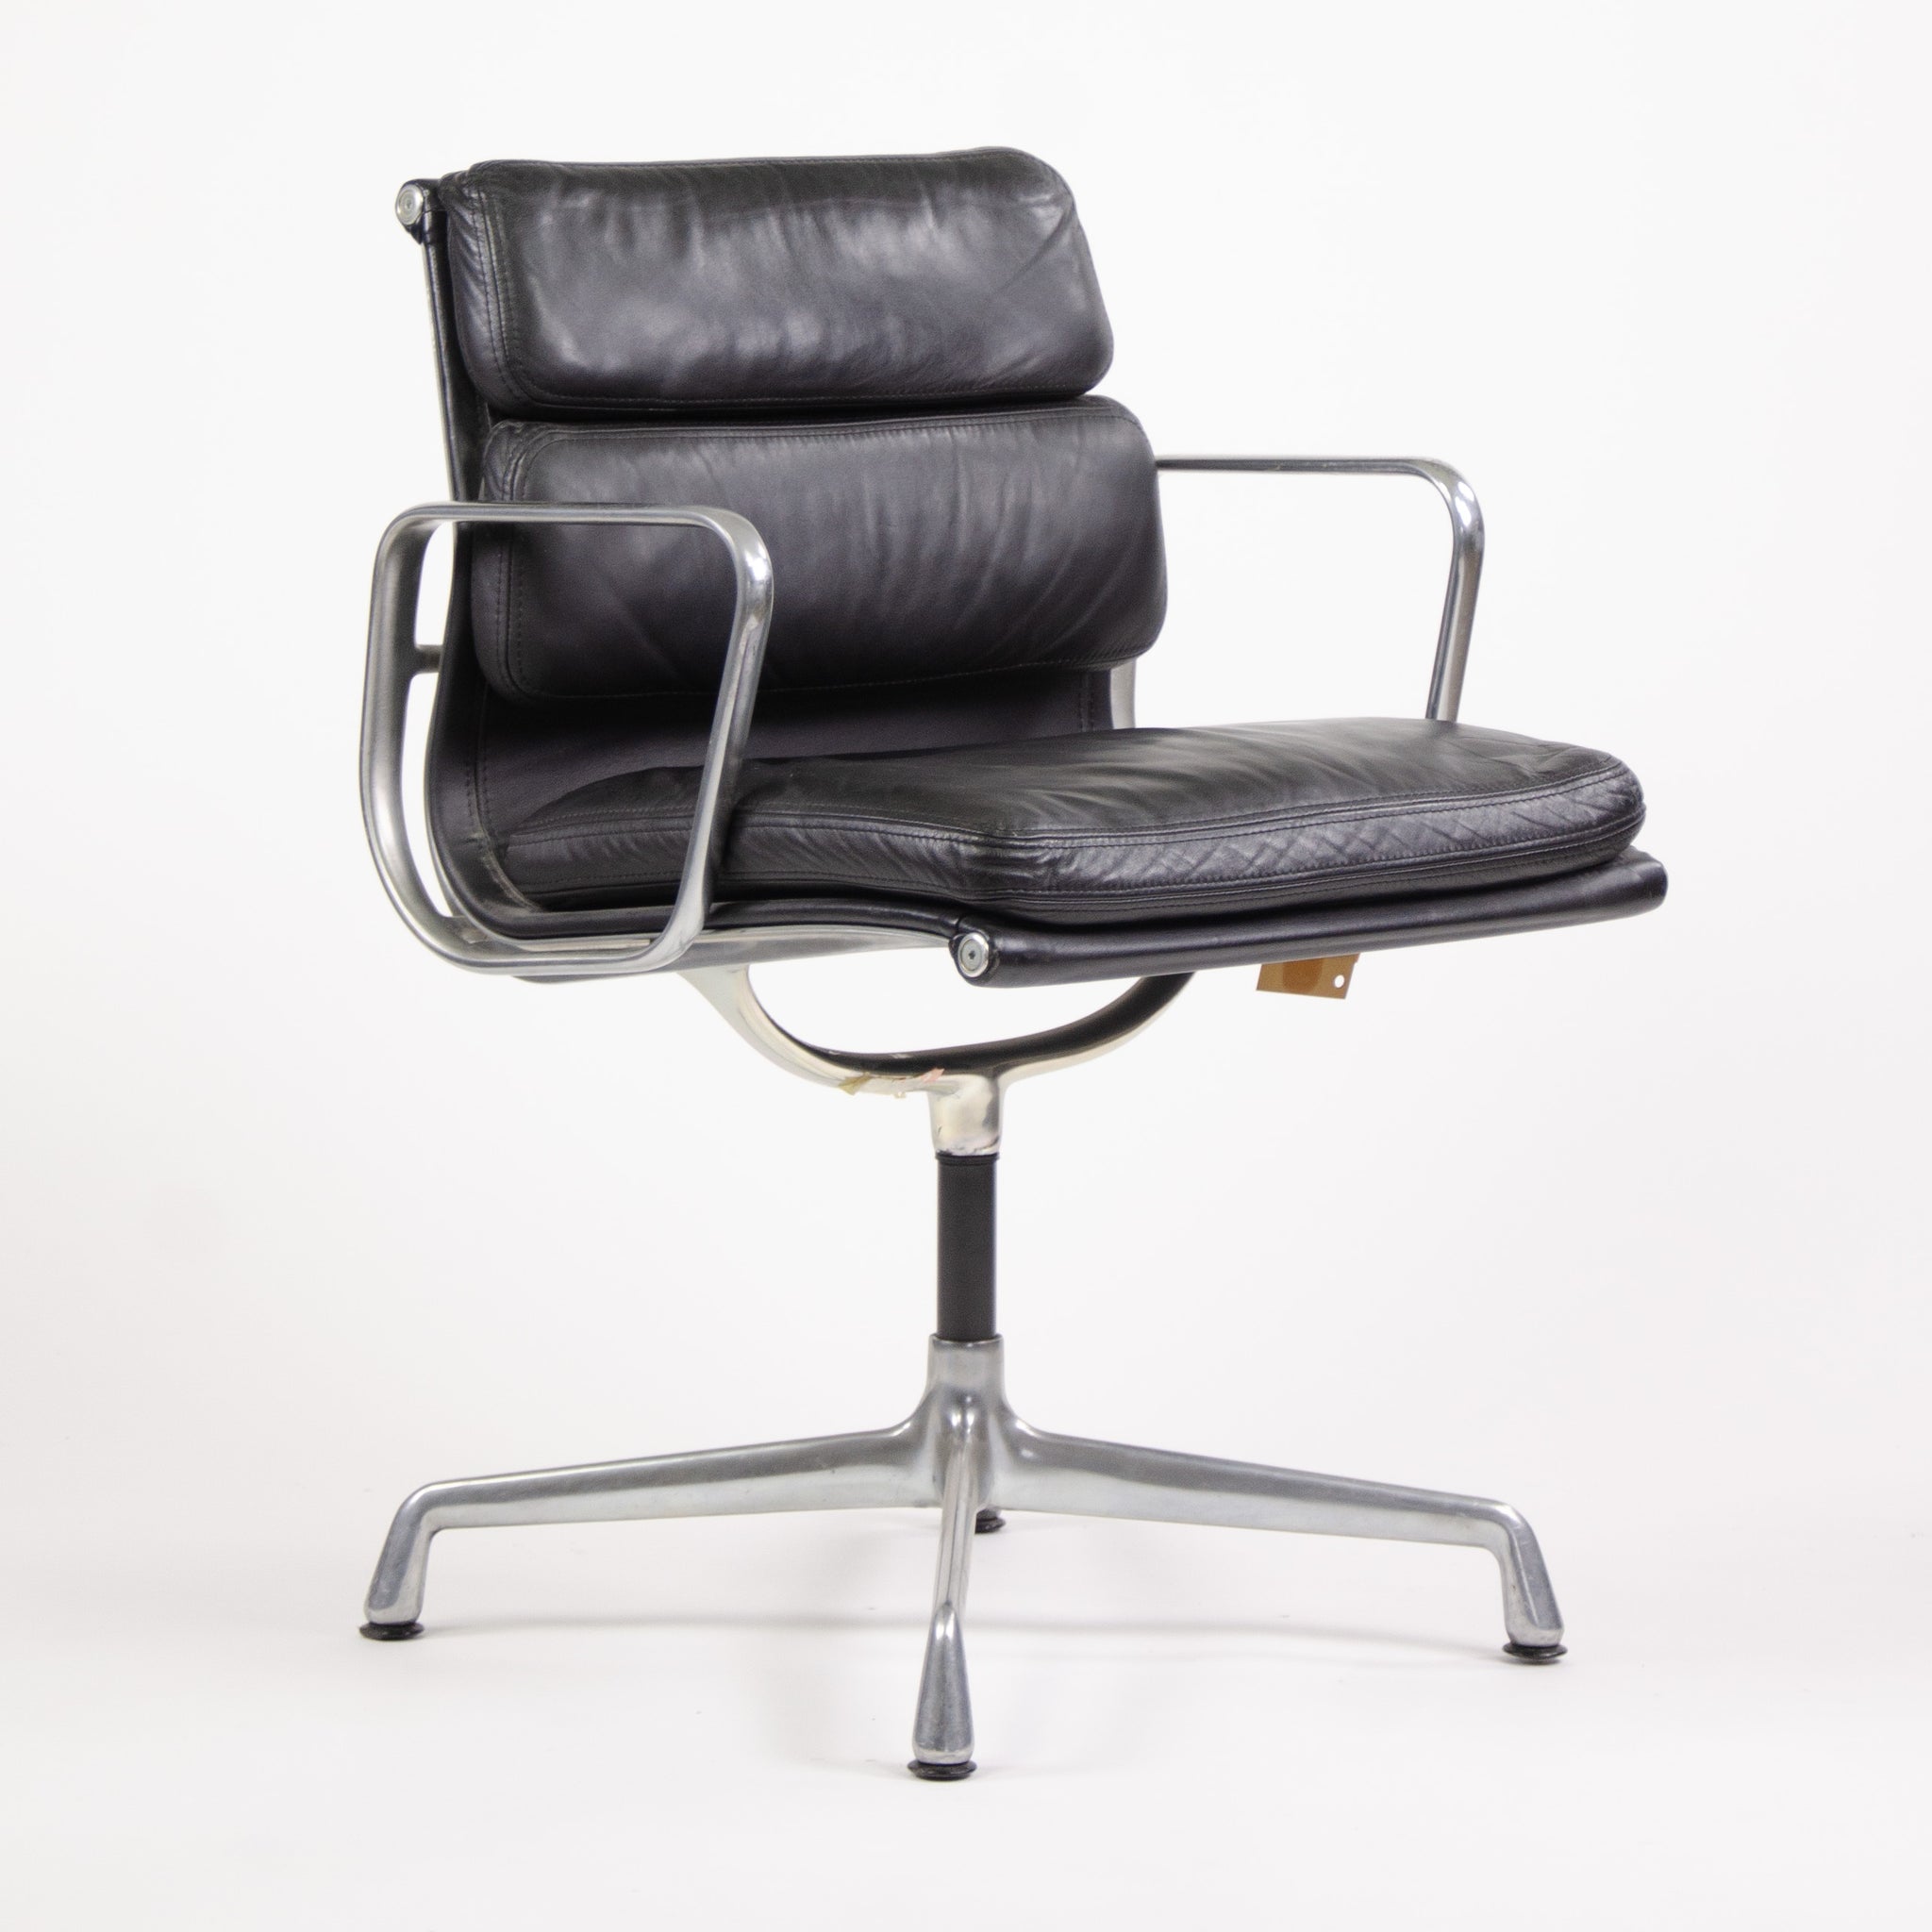 SOLD Pair Eames Herman Miller Soft Pad Aluminum Chairs Black Leather with Girard Fabric